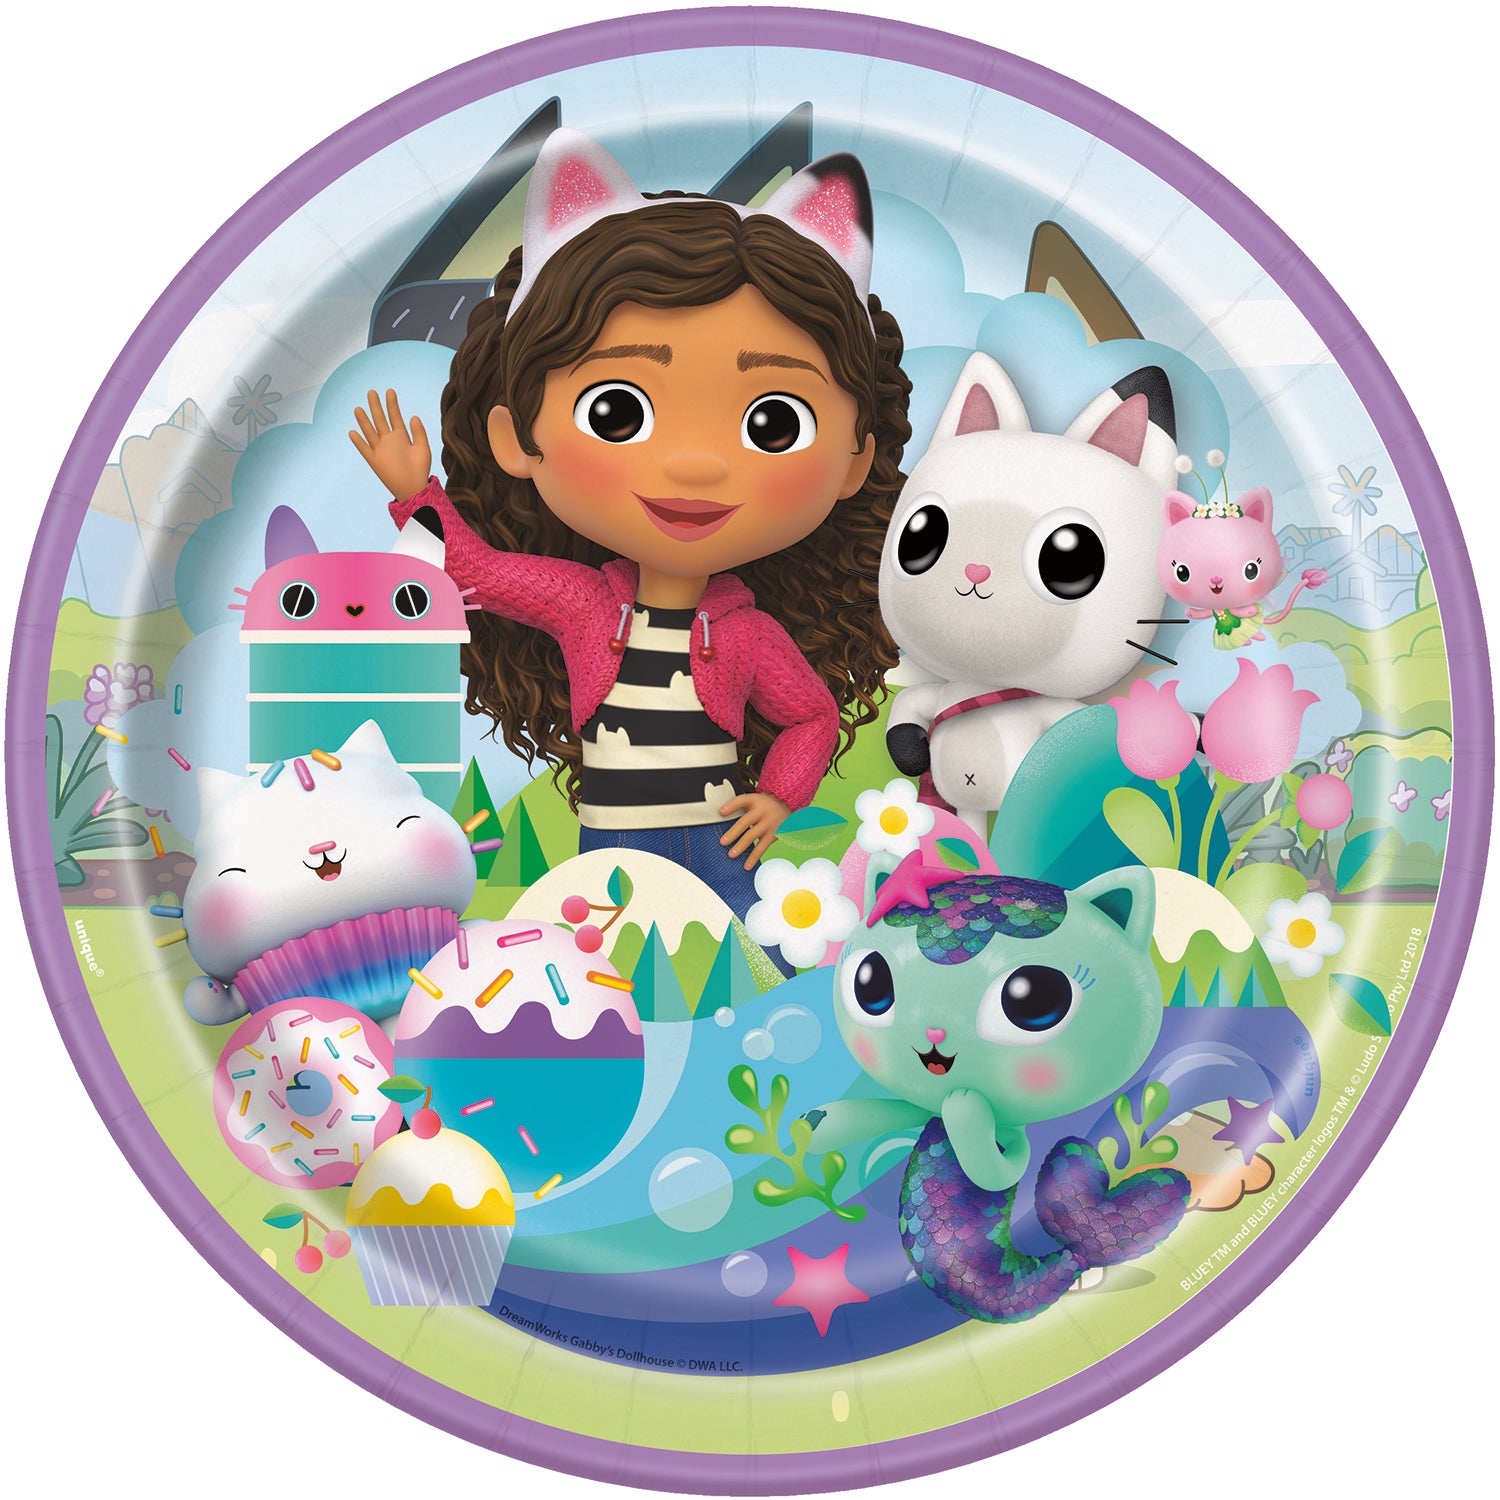 Gabby's Dollhouse 9" Party Dinner Plates [8 per Pack]